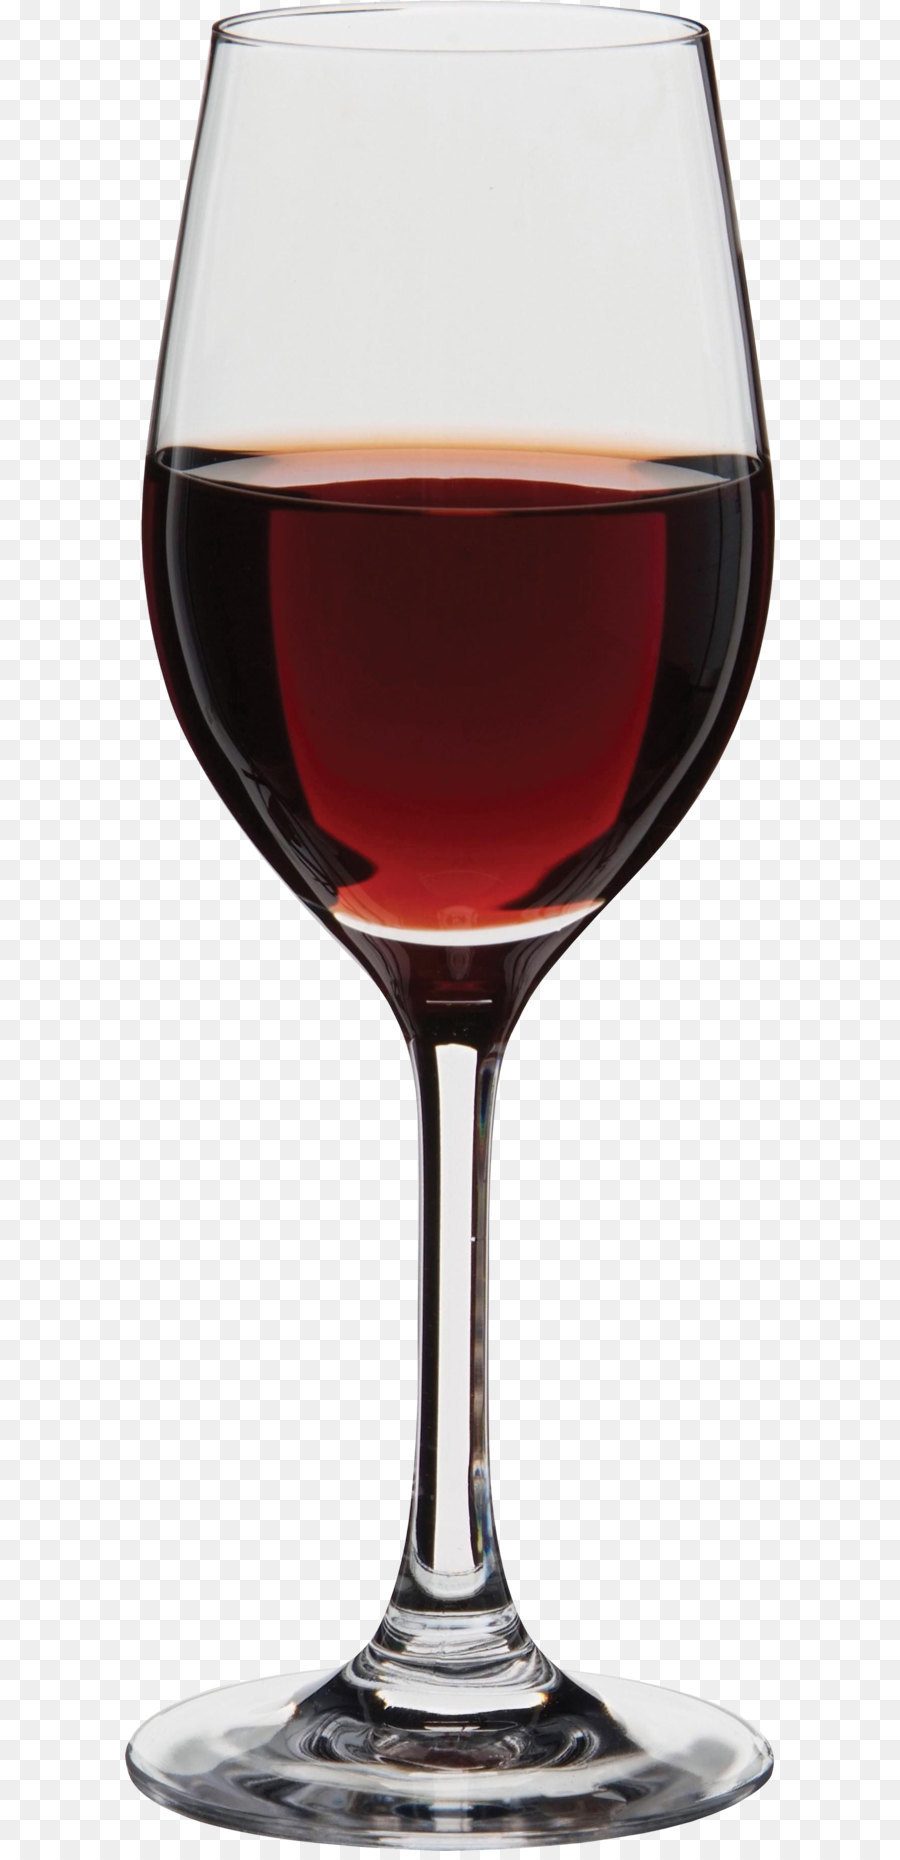 Red Wine Port wine Wine glass Fortified wine - Glass PNG image png download - 1289*3670 - Free Transparent Port Wine png Download.